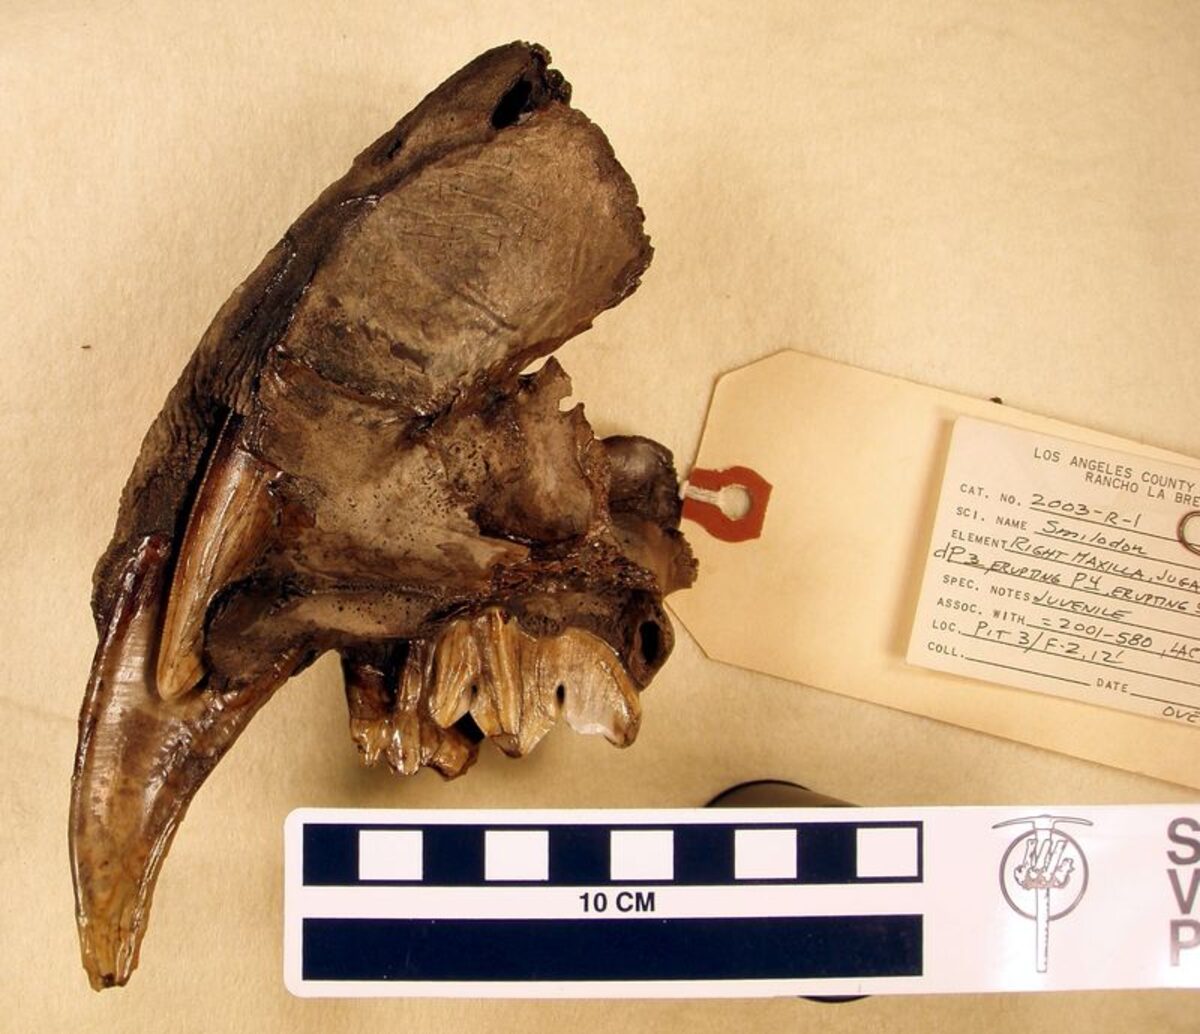 dark brown fossil jaw with teeth and a saber tooth attached, next to card with identifying information